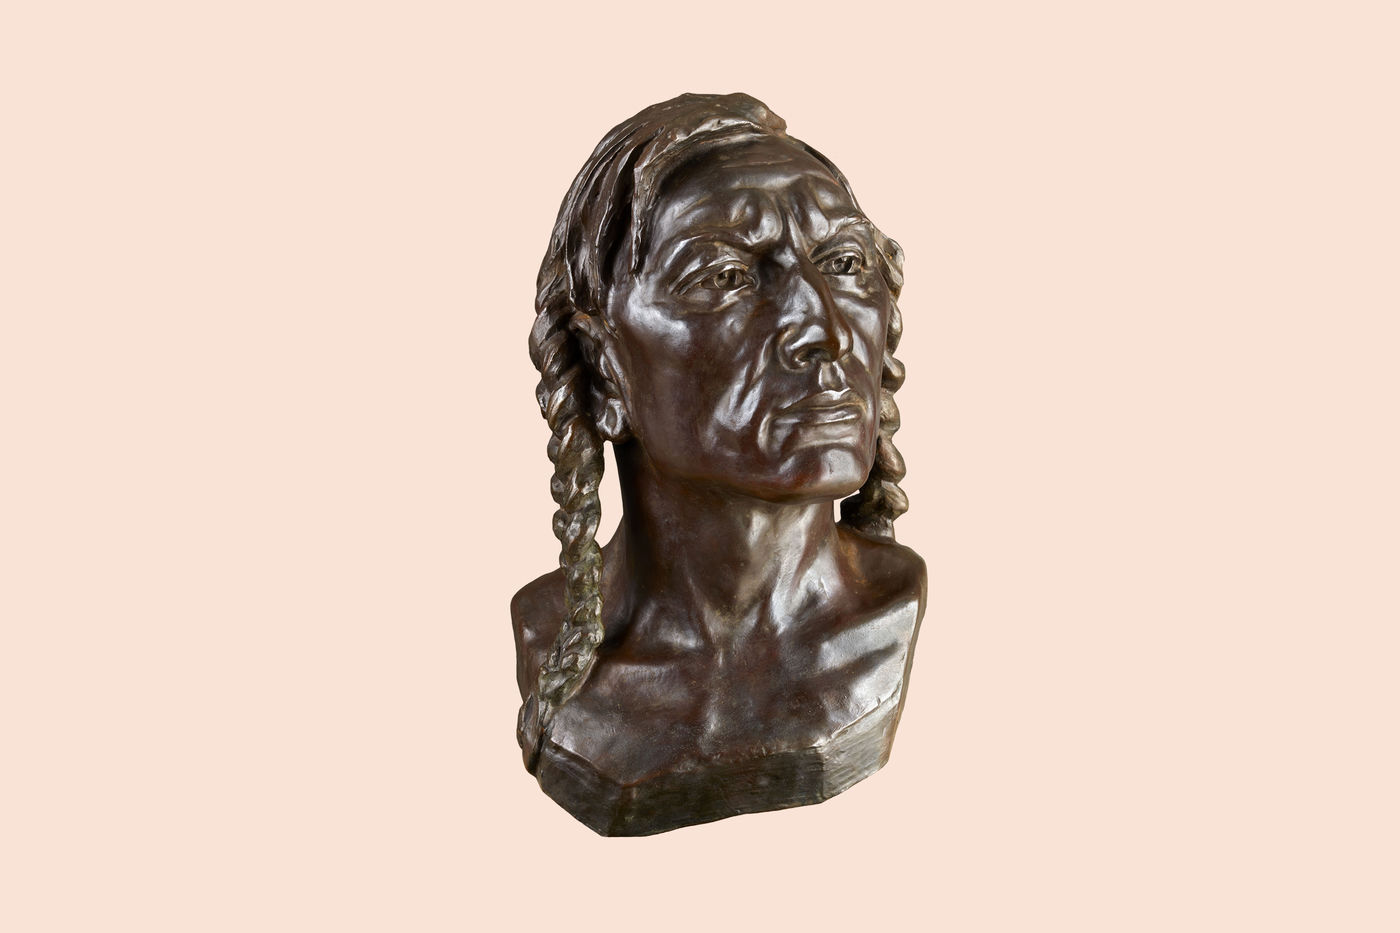 Bronze bust of a Crow man. His head is turned slightly to his left and his chin is very slightly raised. He has two long braids and wrinkles on his brow.